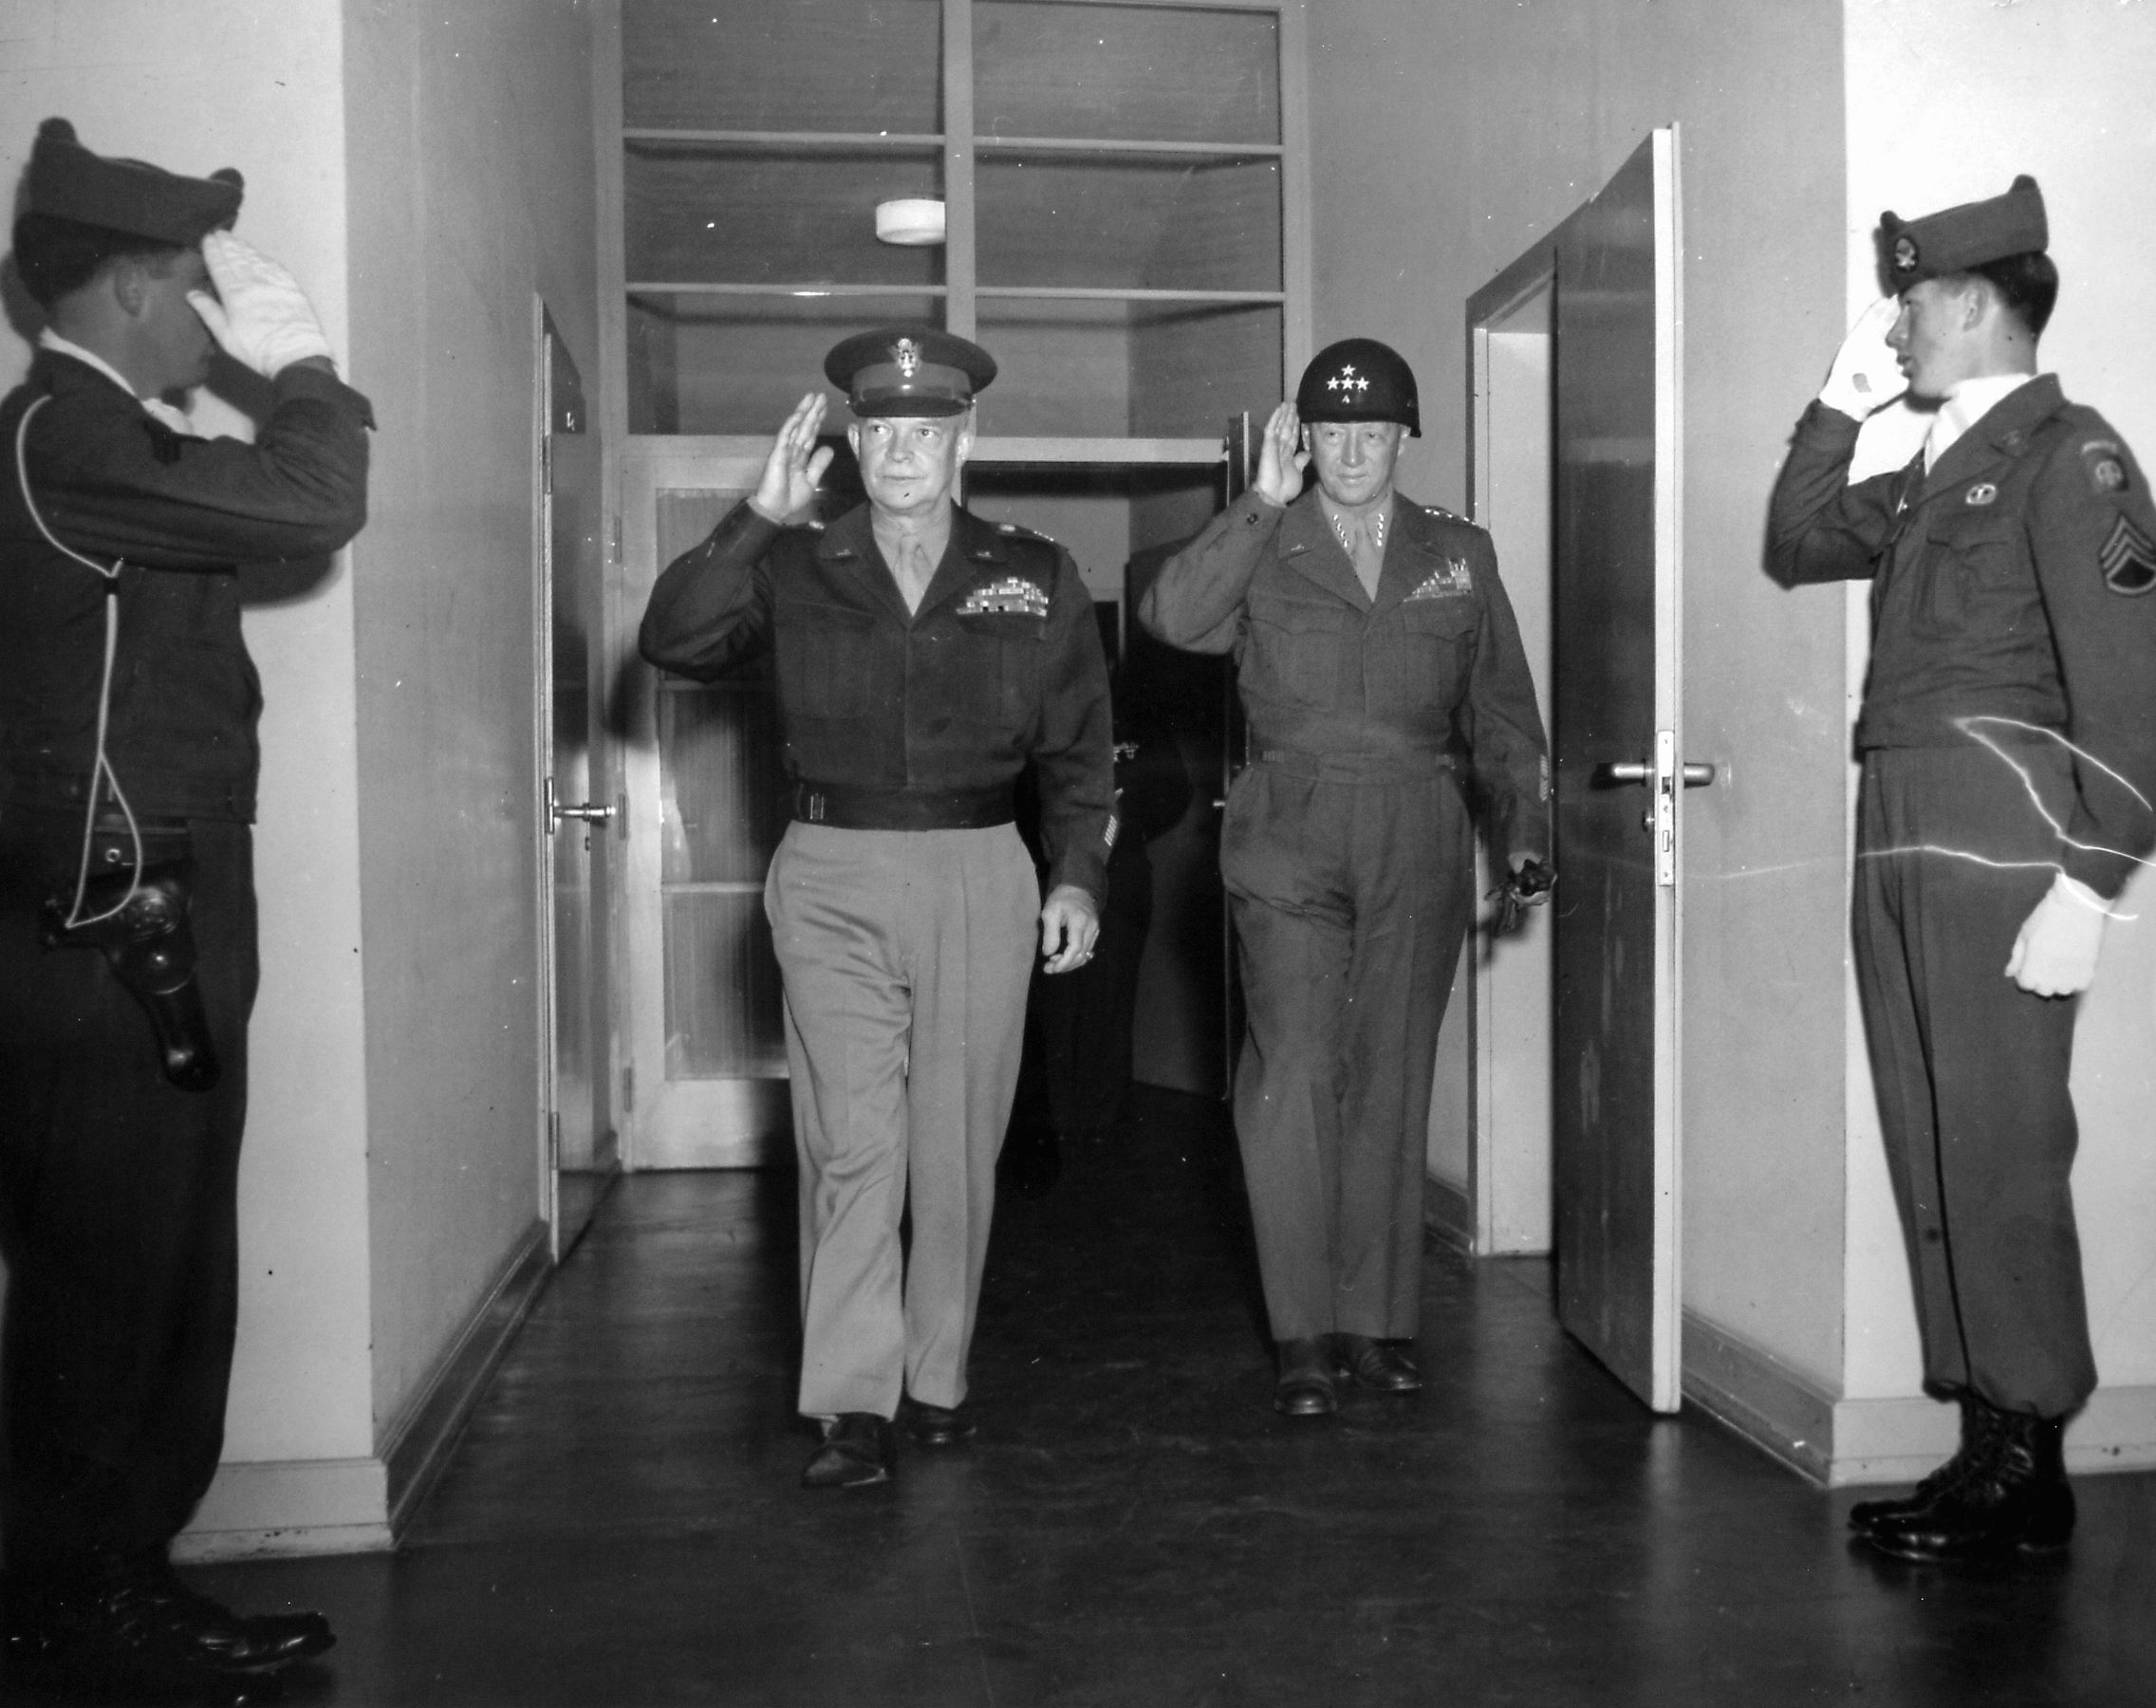 General Eisenhower visited Patton at Bad Tölz and found that Patton had left SS soldiers in charge of concentration camp security. This visit, along with Patton’s public statements, led to his dismissal as commander of the Third Army.